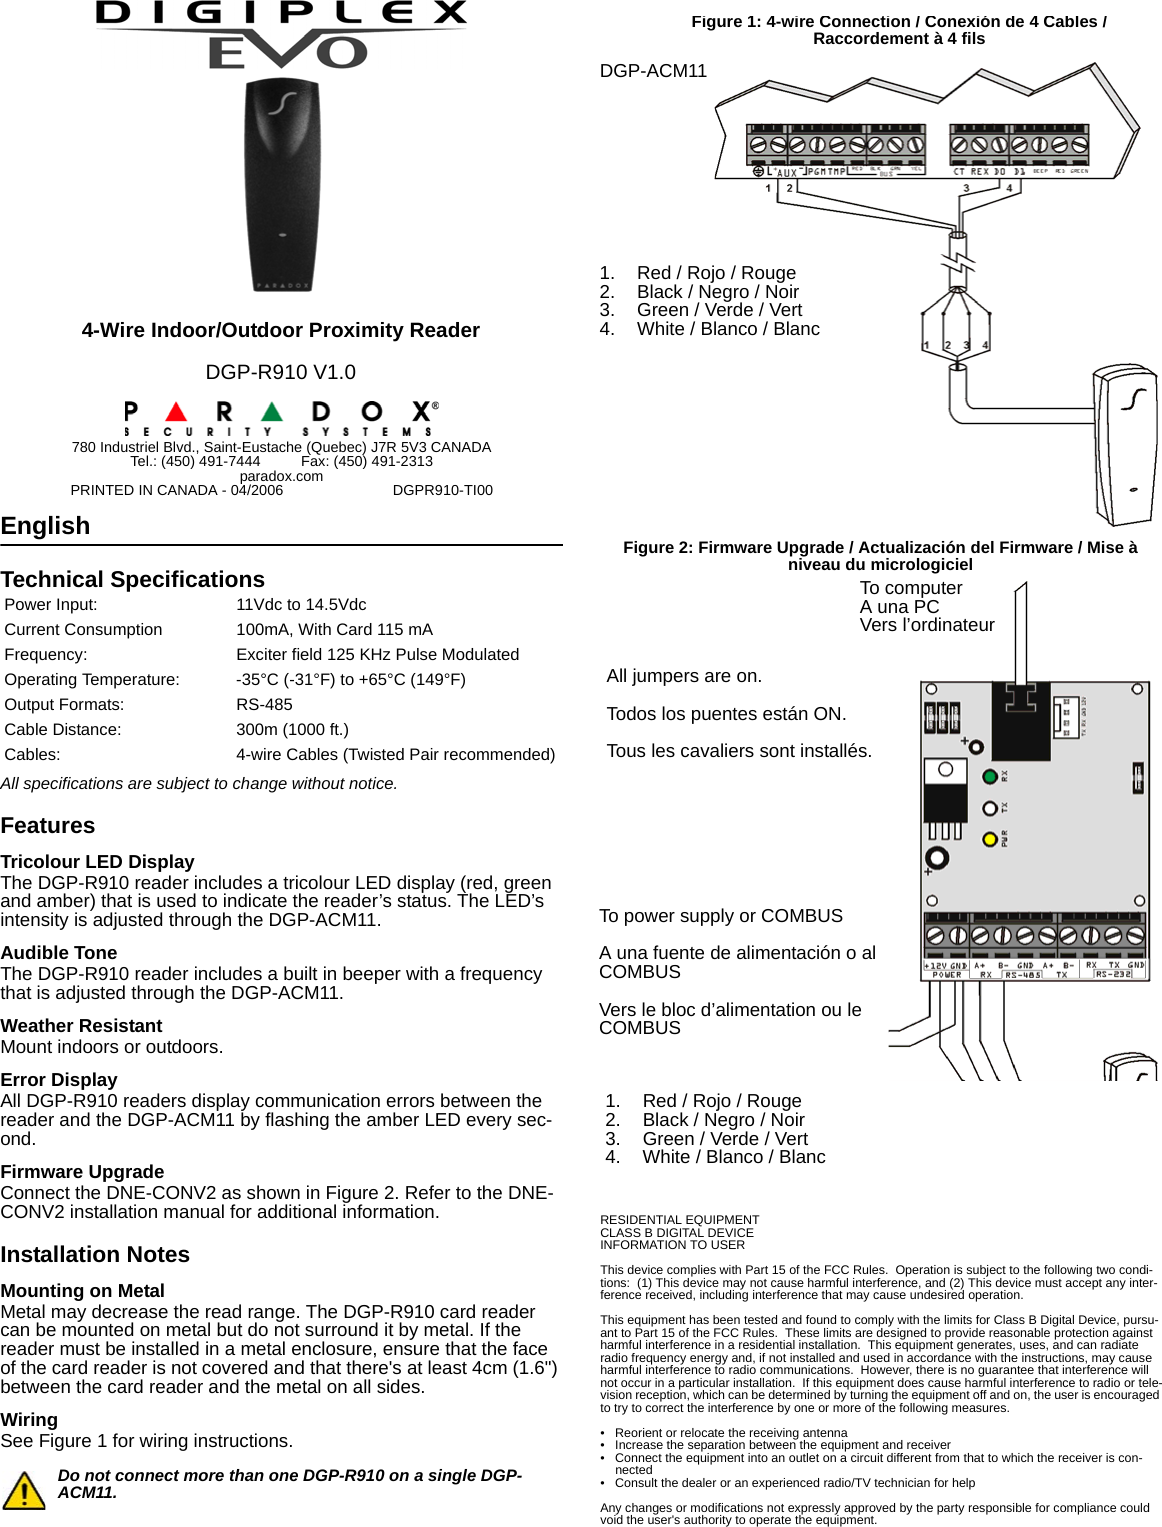 EnglishTechnical SpecificationsAll specifications are subject to change without notice.FeaturesTricolour LED DisplayThe DGP-R910 reader includes a tricolour LED display (red, green and amber) that is used to indicate the reader’s status. The LED’s intensity is adjusted through the DGP-ACM11.Audible ToneThe DGP-R910 reader includes a built in beeper with a frequency that is adjusted through the DGP-ACM11.Weather ResistantMount indoors or outdoors.Error DisplayAll DGP-R910 readers display communication errors between the reader and the DGP-ACM11 by flashing the amber LED every sec-ond.Firmware UpgradeConnect the DNE-CONV2 as shown in Figure 2. Refer to the DNE-CONV2 installation manual for additional information.Installation NotesMounting on MetalMetal may decrease the read range. The DGP-R910 card reader can be mounted on metal but do not surround it by metal. If the reader must be installed in a metal enclosure, ensure that the face of the card reader is not covered and that there&apos;s at least 4cm (1.6&quot;) between the card reader and the metal on all sides.WiringSee Figure 1 for wiring instructions.Do not connect more than one DGP-R910 on a single DGP-ACM11.RESIDENTIAL EQUIPMENTCLASS B DIGITAL DEVICEINFORMATION TO USERThis device complies with Part 15 of the FCC Rules.  Operation is subject to the following two condi-tions:  (1) This device may not cause harmful interference, and (2) This device must accept any inter-ference received, including interference that may cause undesired operation.This equipment has been tested and found to comply with the limits for Class B Digital Device, pursu-ant to Part 15 of the FCC Rules.  These limits are designed to provide reasonable protection against harmful interference in a residential installation.  This equipment generates, uses, and can radiate radio frequency energy and, if not installed and used in accordance with the instructions, may cause harmful interference to radio communications.  However, there is no guarantee that interference will not occur in a particular installation.  If this equipment does cause harmful interference to radio or tele-vision reception, which can be determined by turning the equipment off and on, the user is encouraged to try to correct the interference by one or more of the following measures.• Reorient or relocate the receiving antenna• Increase the separation between the equipment and receiver• Connect the equipment into an outlet on a circuit different from that to which the receiver is con-nected• Consult the dealer or an experienced radio/TV technician for helpAny changes or modifications not expressly approved by the party responsible for compliance could void the user&apos;s authority to operate the equipment.Power Input: 11Vdc to 14.5VdcCurrent Consumption 100mA, With Card 115 mAFrequency: Exciter field 125 KHz Pulse ModulatedOperating Temperature: -35°C (-31°F) to +65°C (149°F)Output Formats: RS-485Cable Distance: 300m (1000 ft.)Cables: 4-wire Cables (Twisted Pair recommended)4-Wire Indoor/Outdoor Proximity ReaderDGP-R910 V1.0780 Industriel Blvd., Saint-Eustache (Quebec) J7R 5V3 CANADATel.: (450) 491-7444          Fax: (450) 491-2313paradox.comPRINTED IN CANADA - 04/2006                           DGPR910-TI00DGP-ACM11Figure 1: 4-wire Connection / Conexión de 4 Cables / Raccordement à 4 fils1. Red / Rojo / Rouge2. Black / Negro / Noir3. Green / Verde / Vert4. White / Blanco / BlancAll jumpers are on.Todos los puentes están ON.Tous les cavaliers sont installés.To power supply or COMBUSA una fuente de alimentación o al COMBUSVers le bloc d’alimentation ou le COMBUSTo computerA una PCVers l’ordinateurFigure 2: Firmware Upgrade / Actualización del Firmware / Mise à niveau du micrologiciel1. Red / Rojo / Rouge2. Black / Negro / Noir3. Green / Verde / Vert4. White / Blanco / Blanc